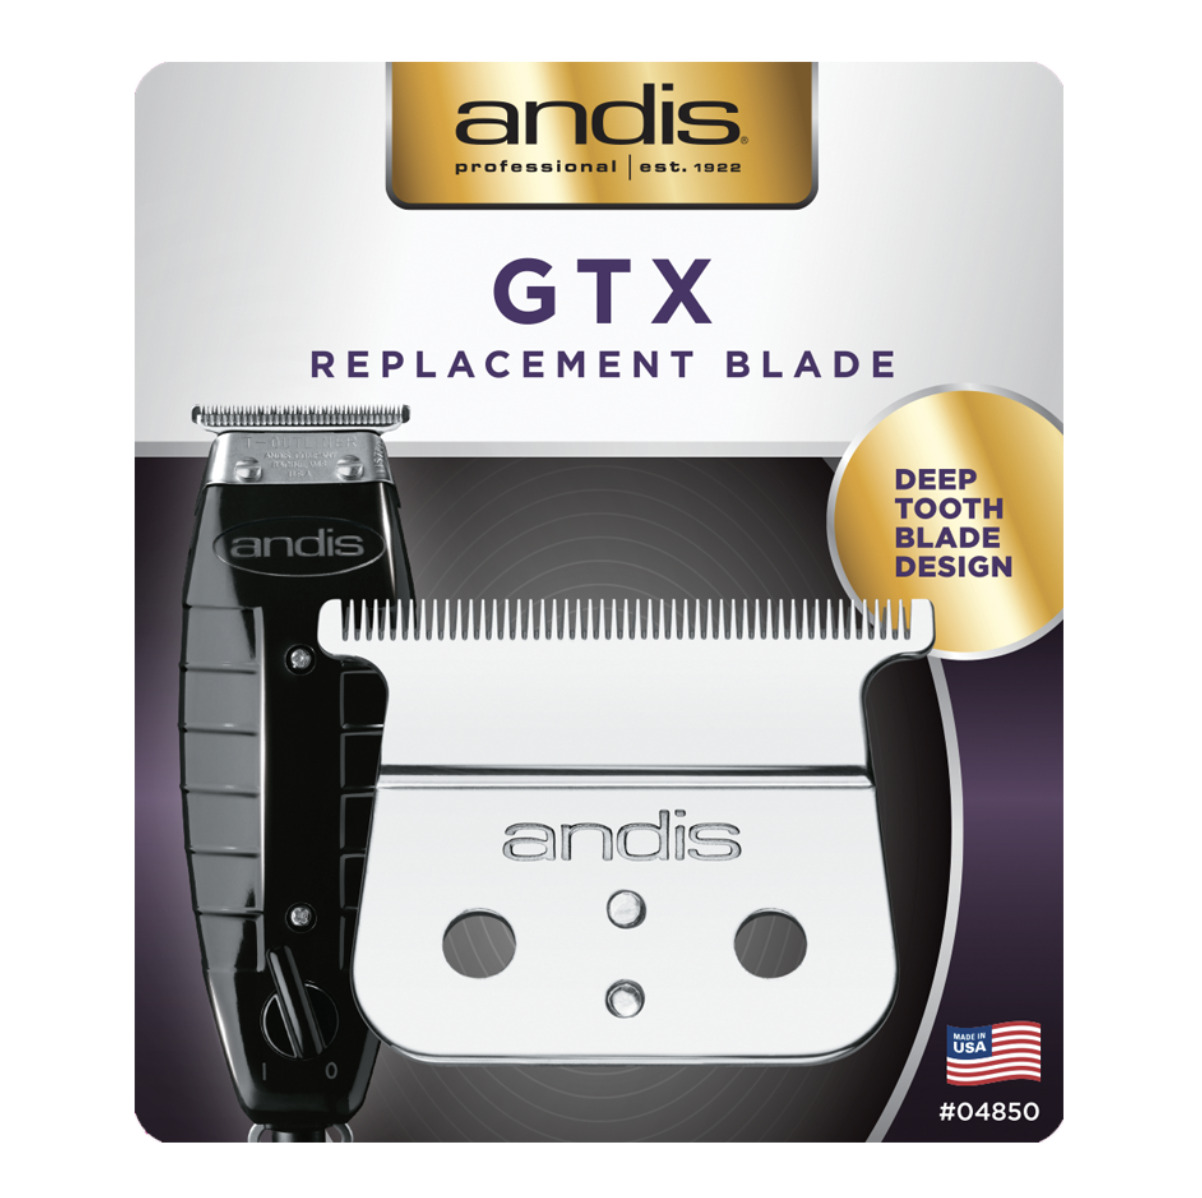 Andis GTX Deep Tooth Replacement Blade #04850